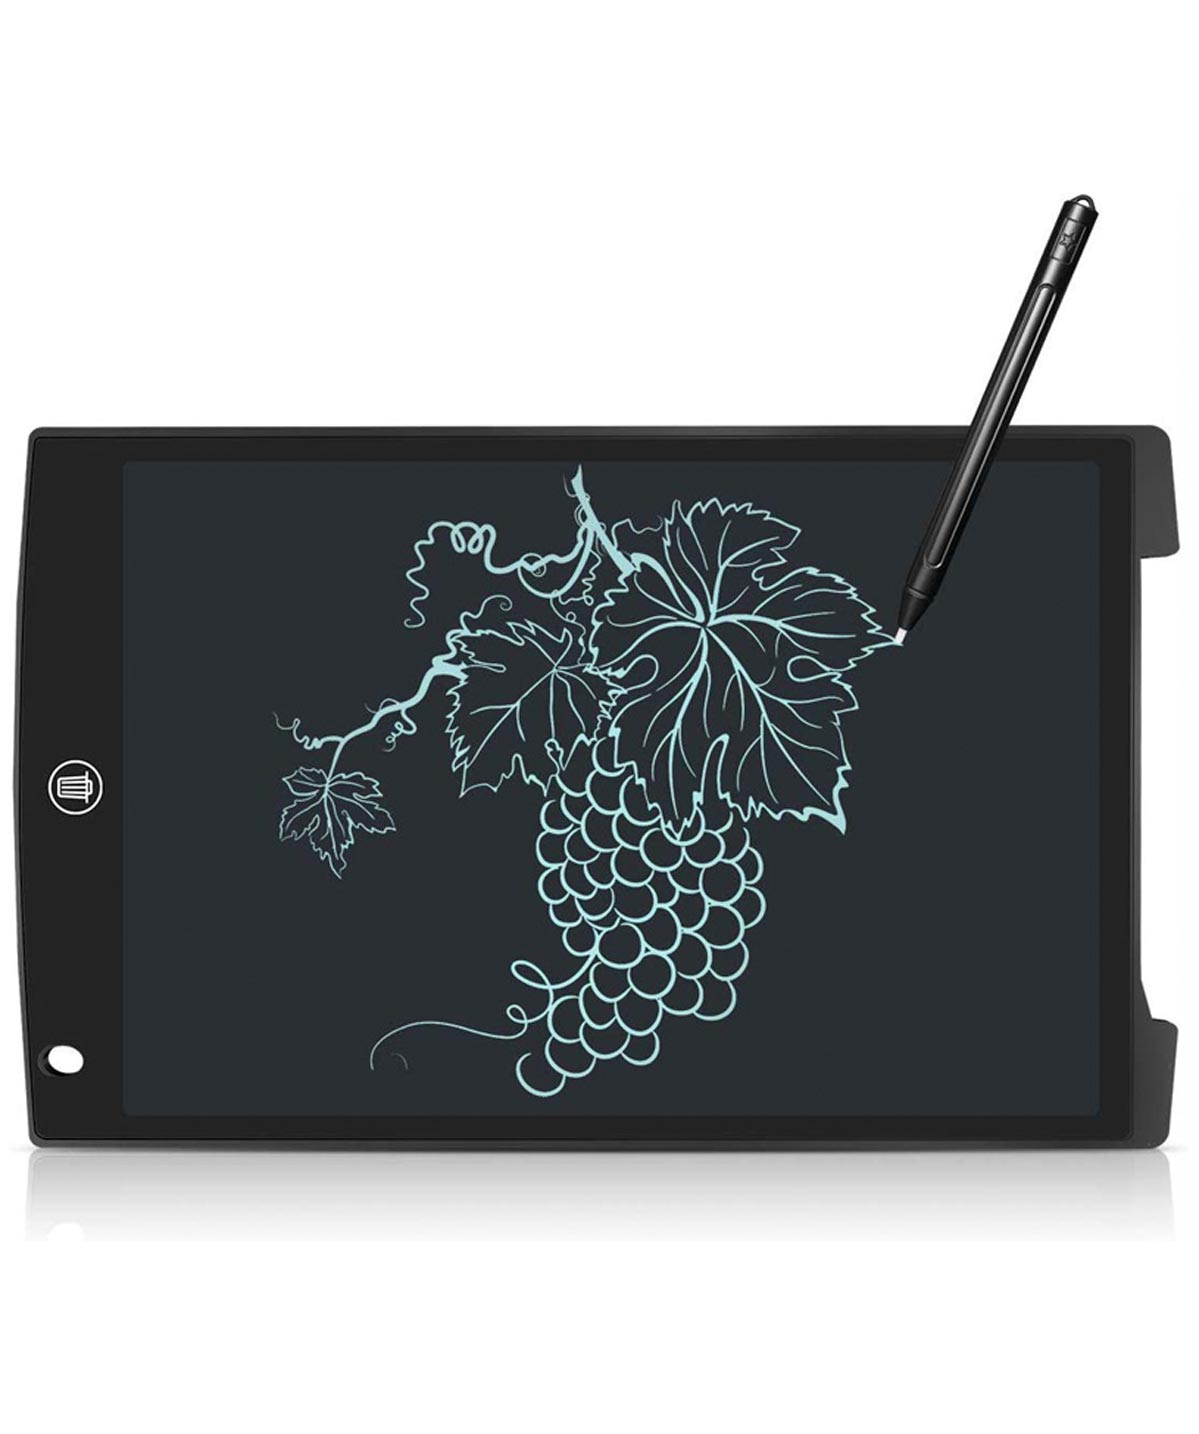 LCD Writing և Drawing Electronic Tablet-Board 12 inches (black)